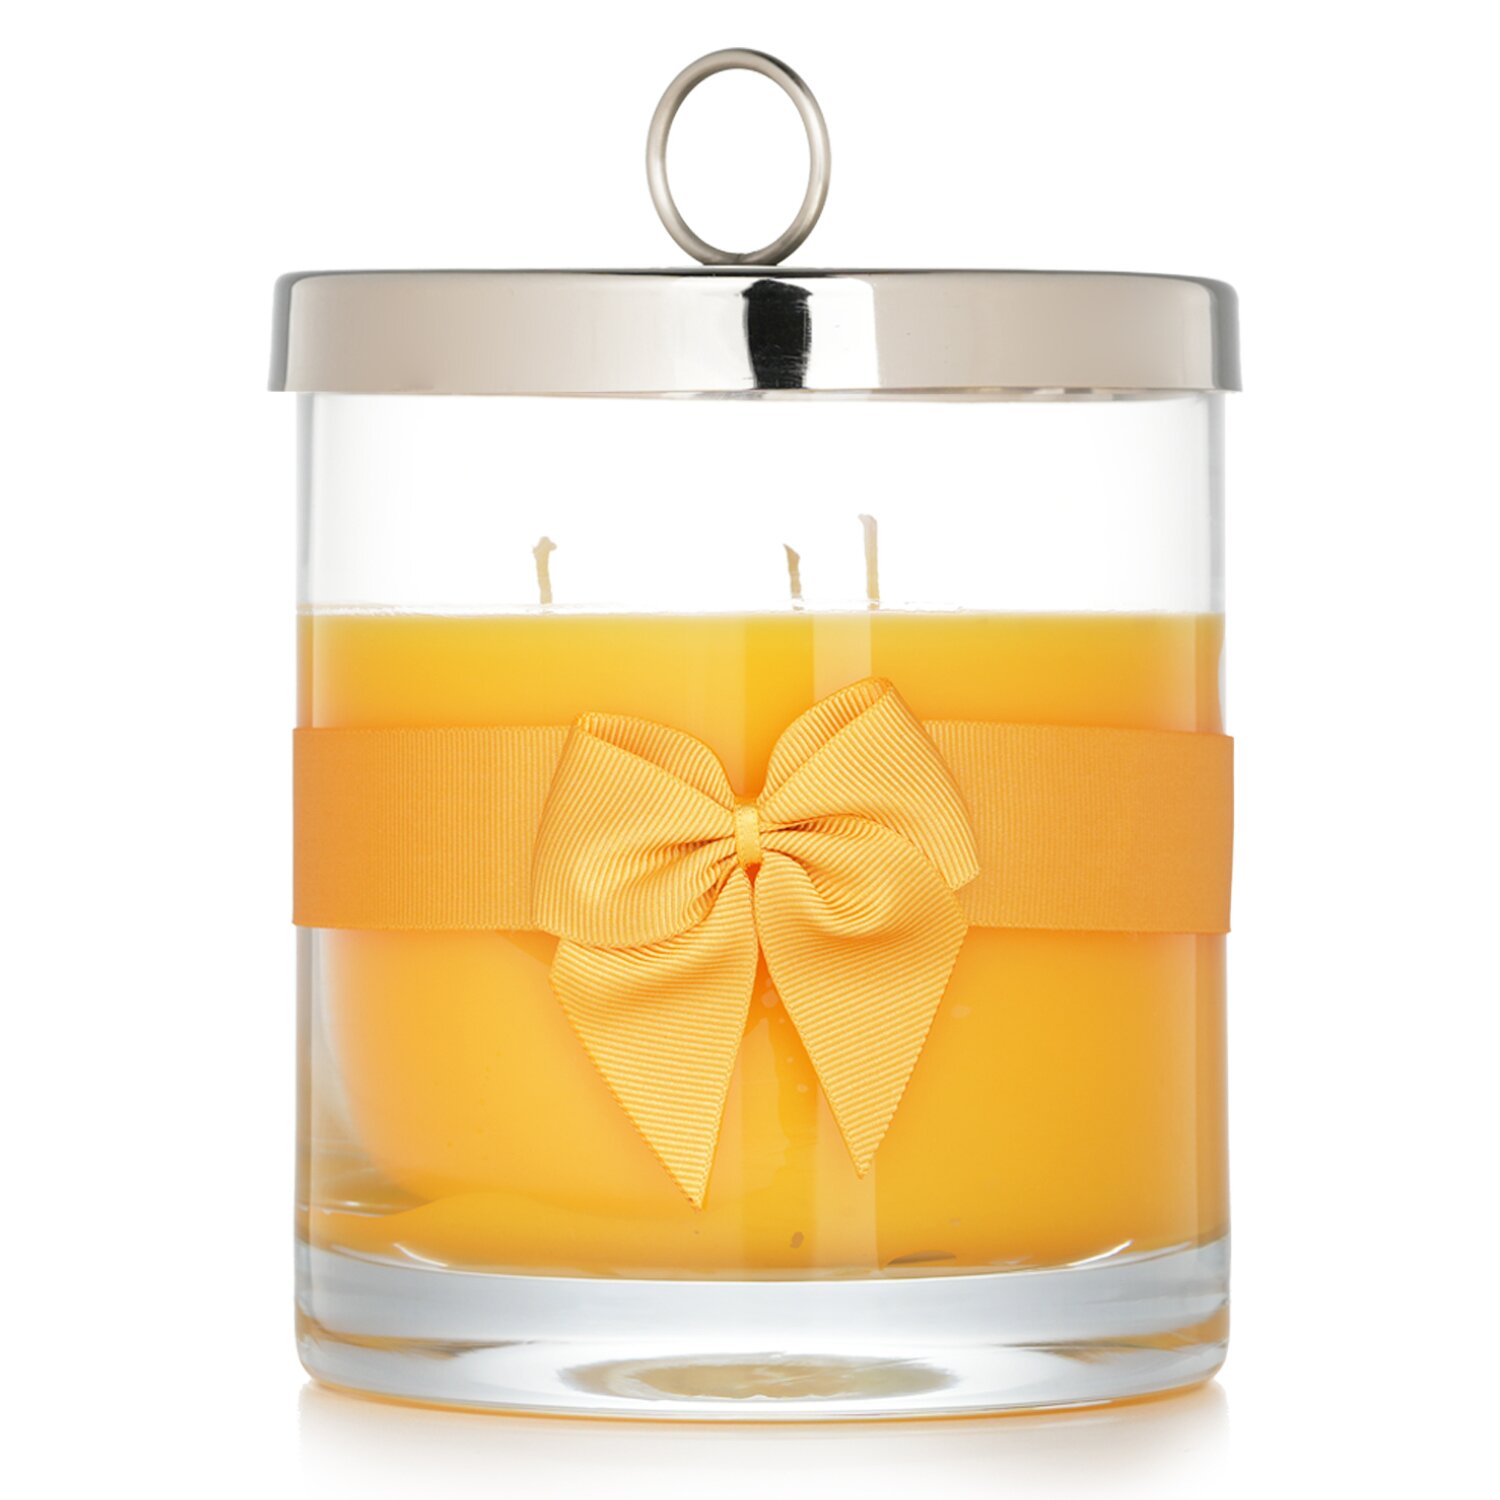 Rituals Private Collection Scented Candle - Precious Amber 360g/12.6oz